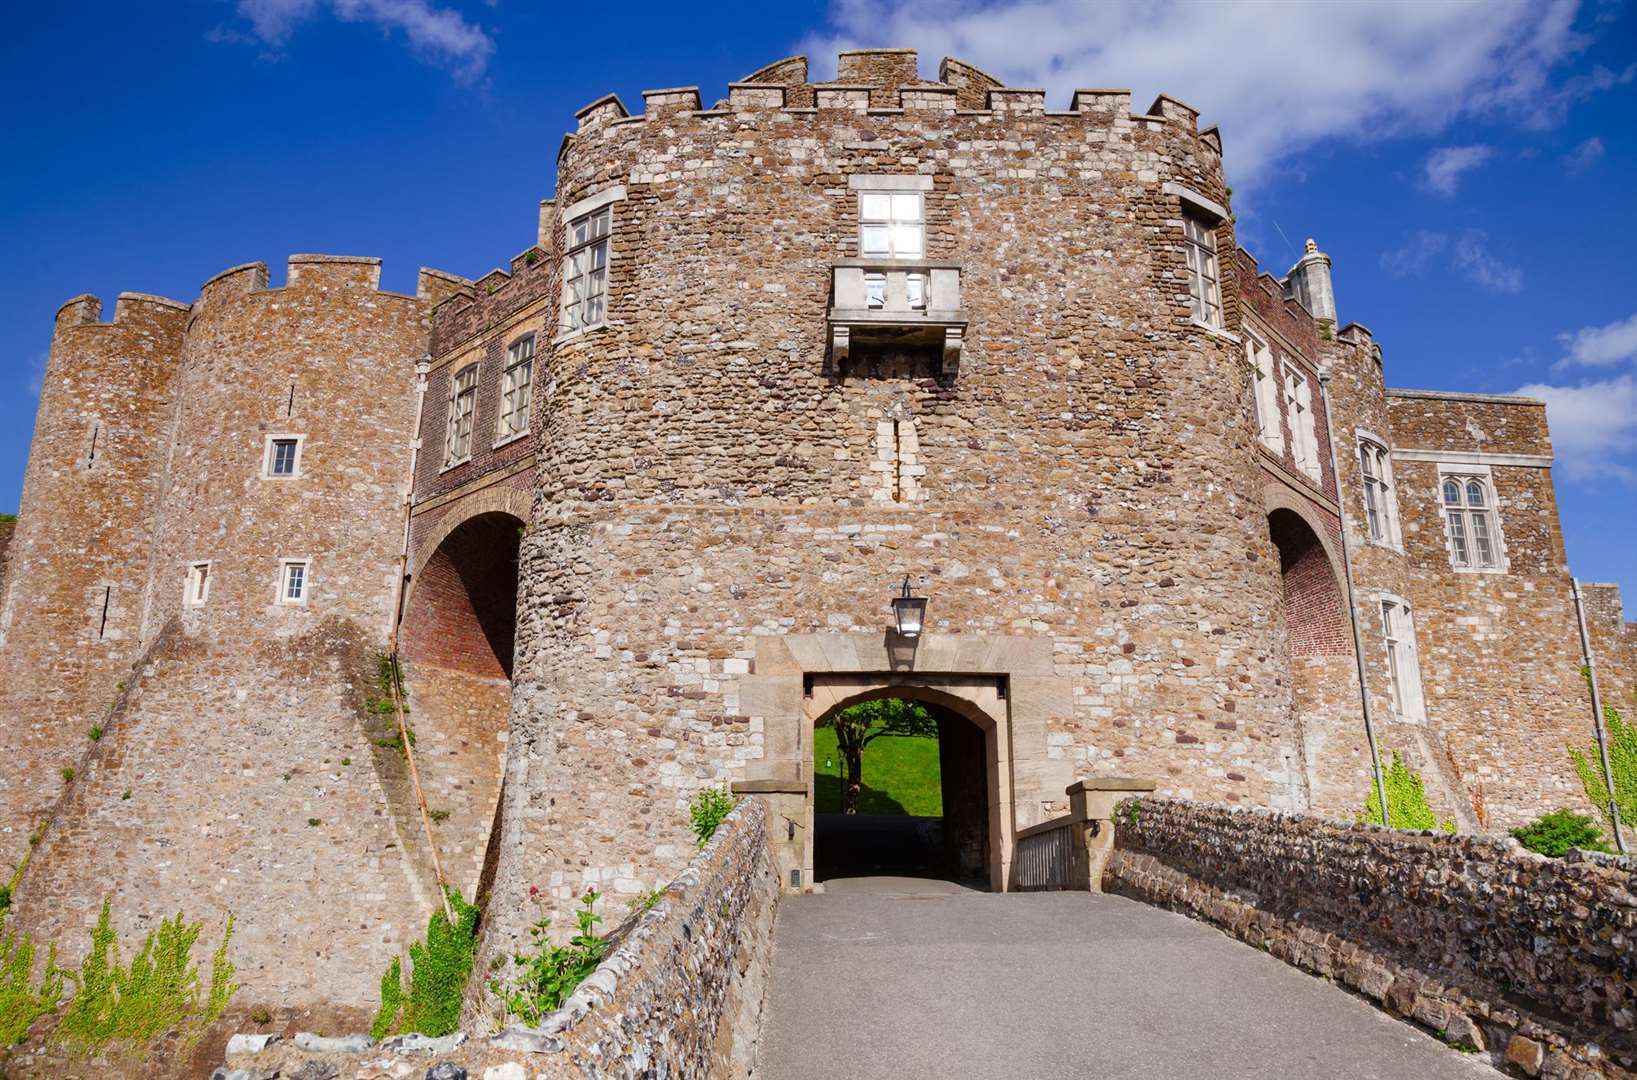 You can get free entry to Dover Castle